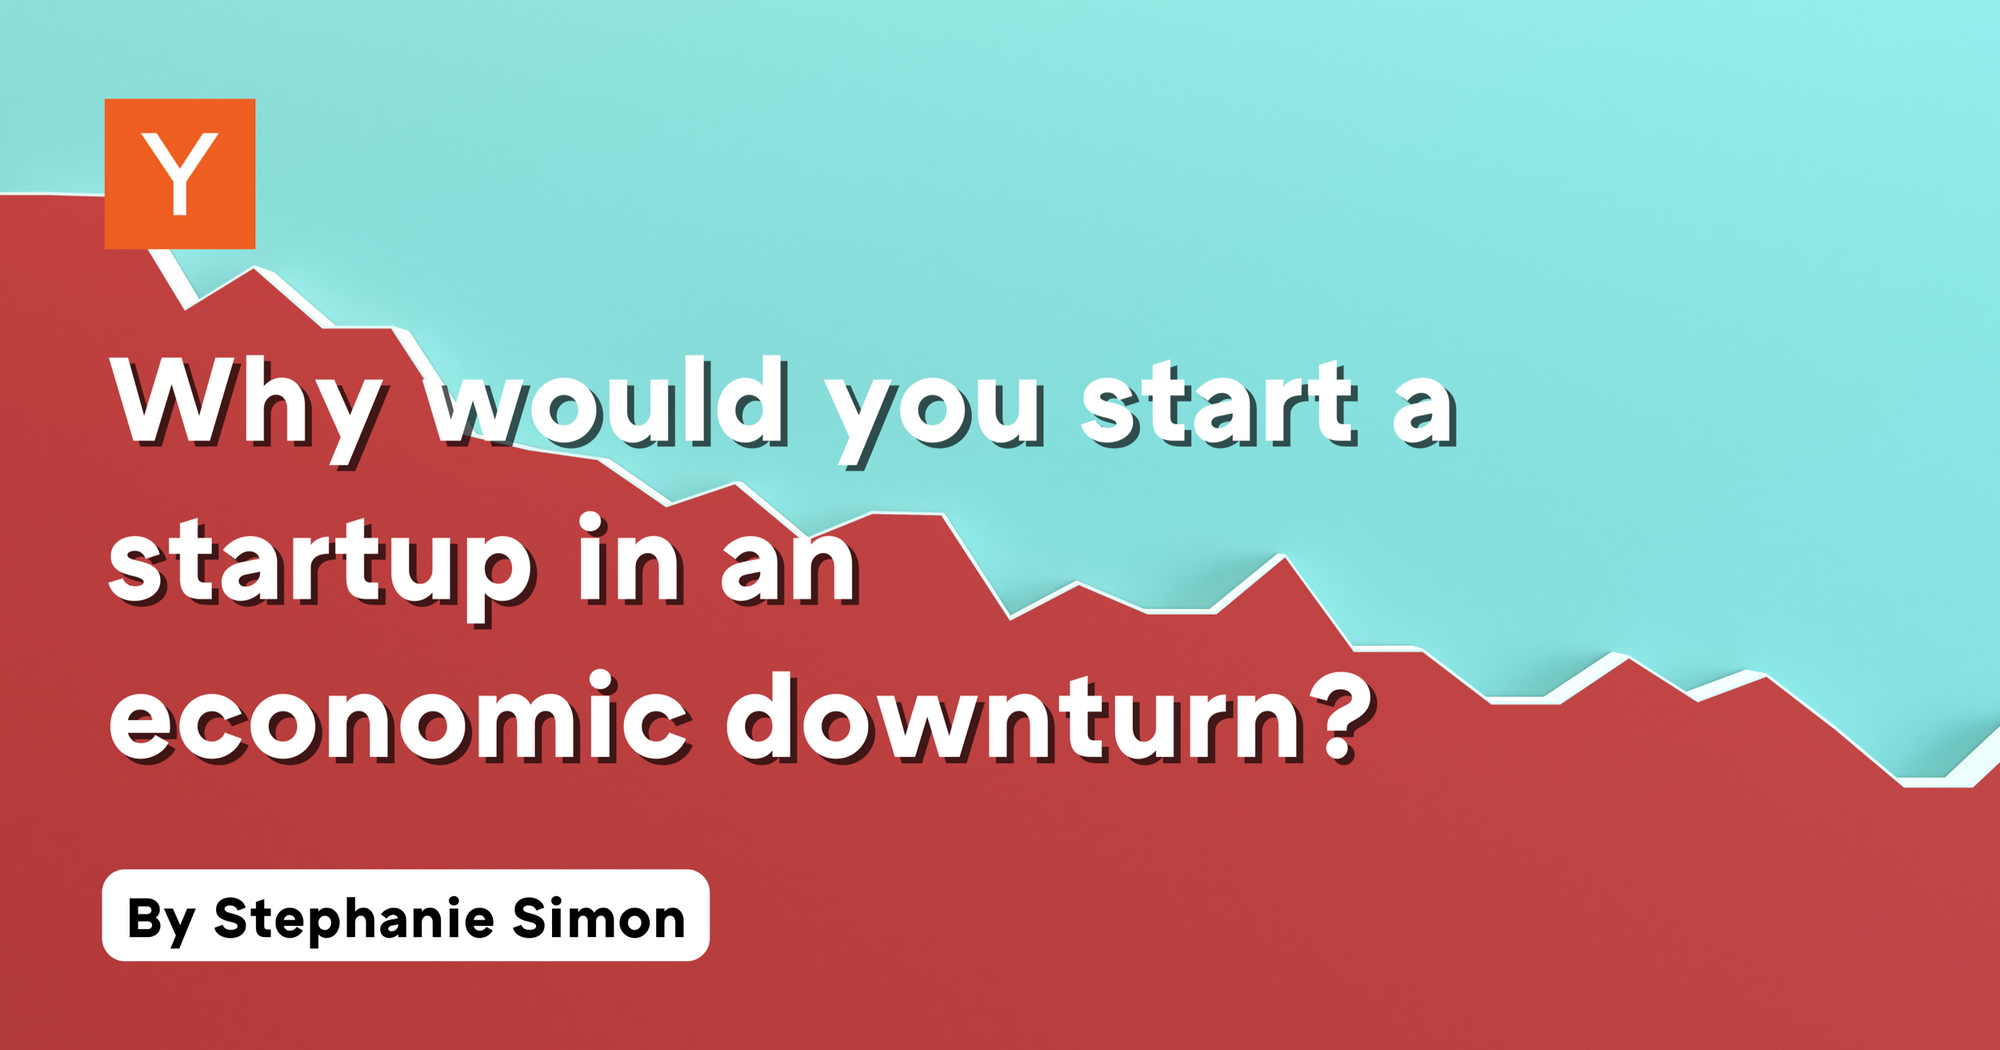 Why would you start a startup in an economic downturn?